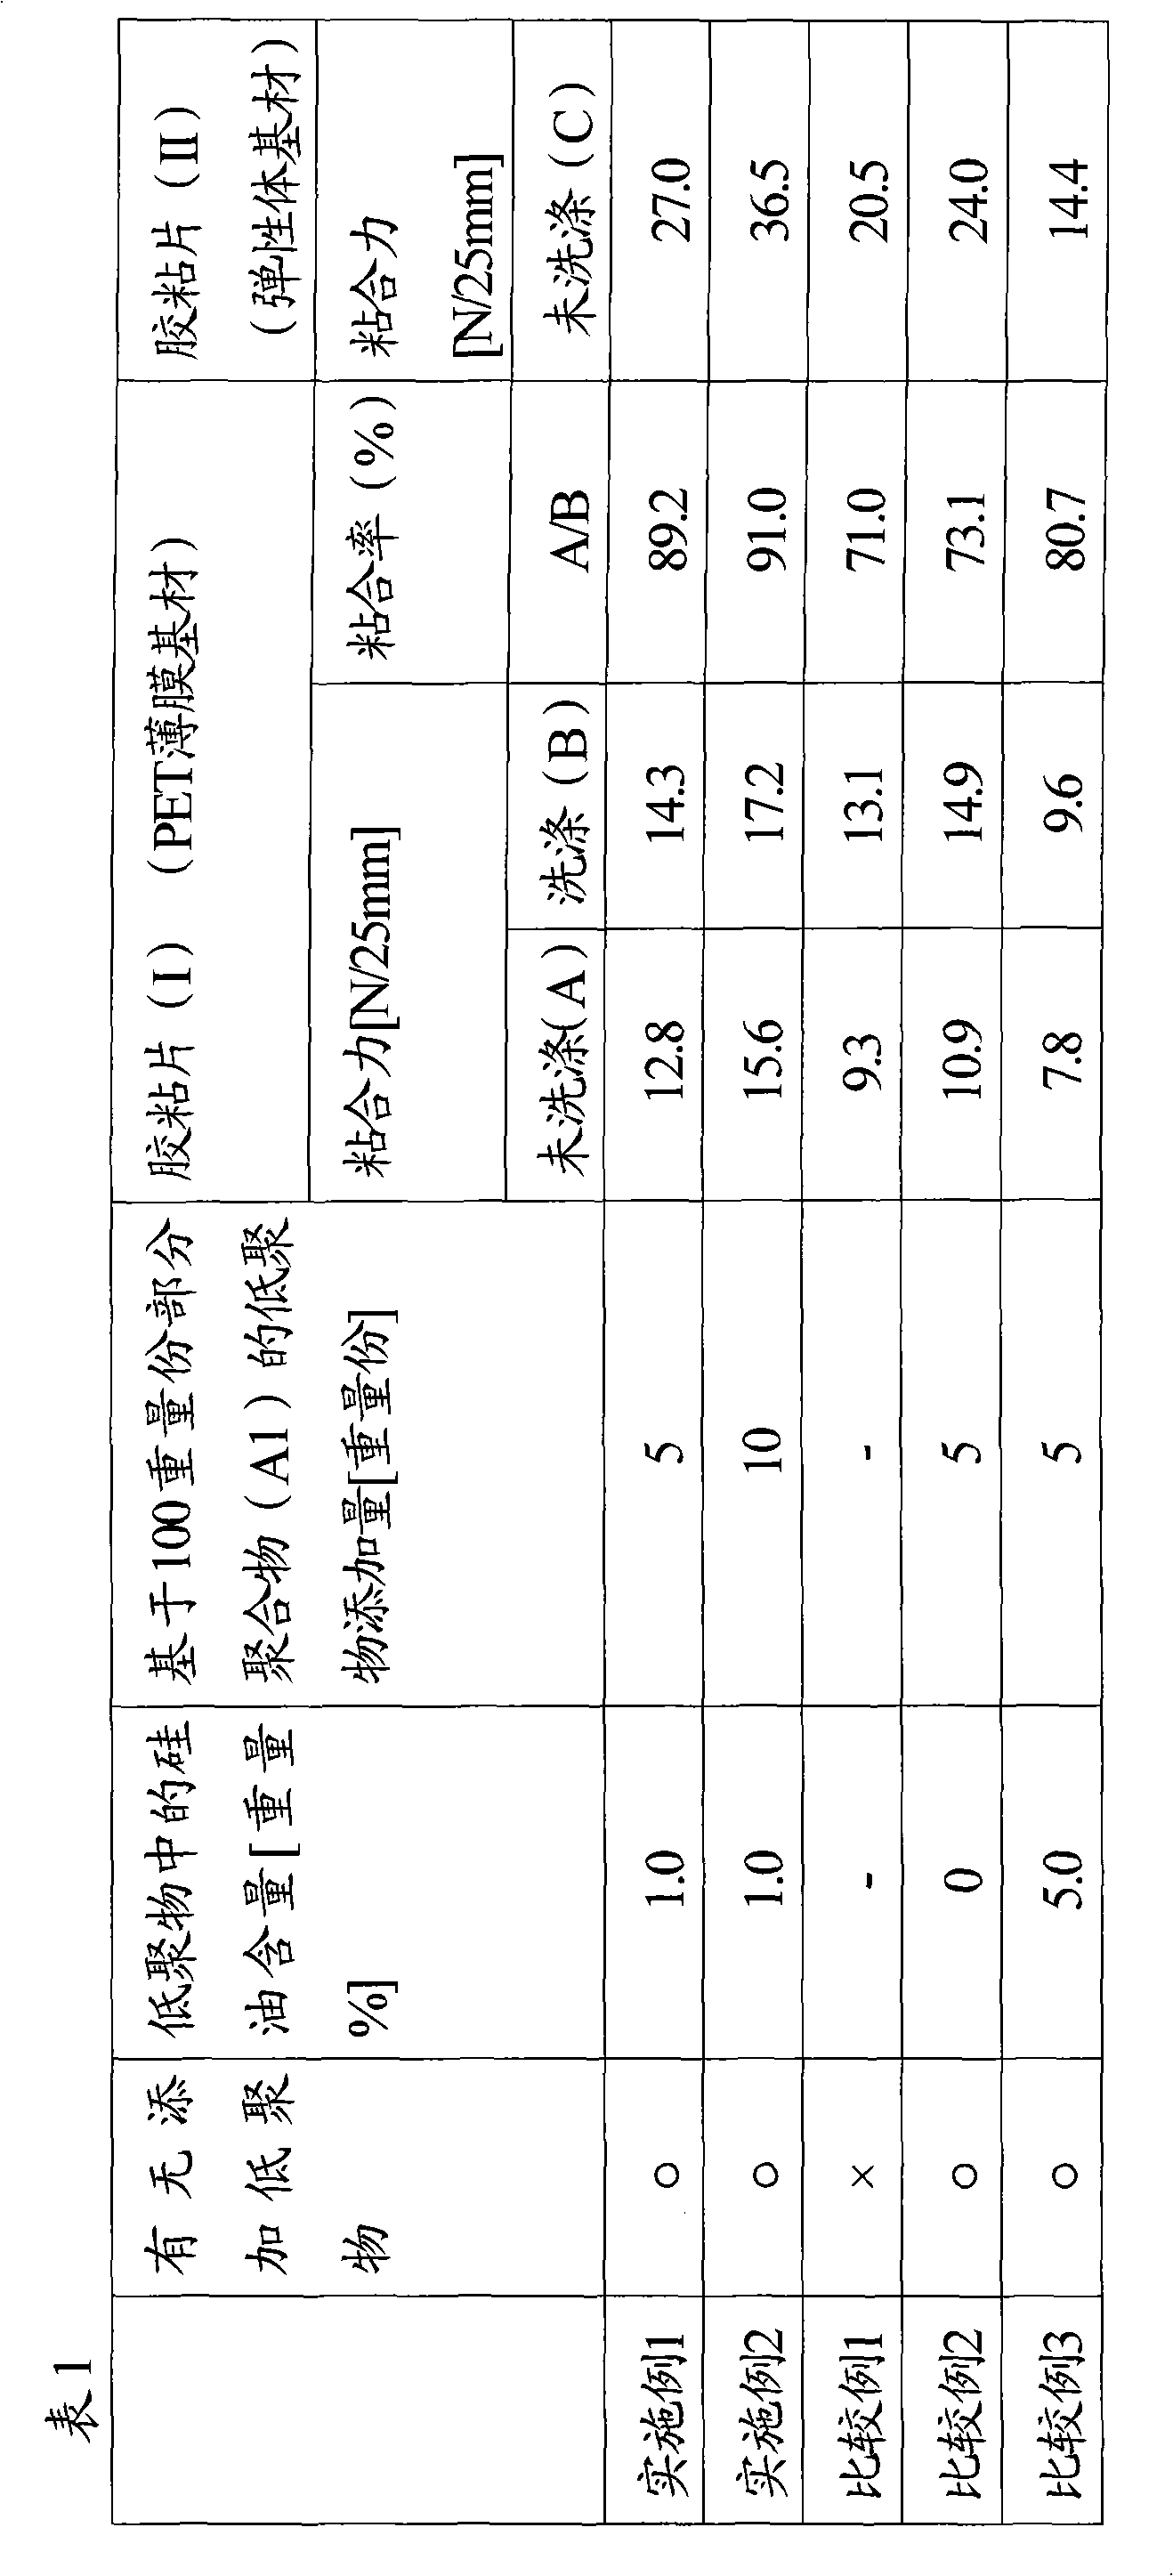 Acrylic adhesive composition, acrylic adhesive sheet, and method for bonding the adhesive sheet to coated surface of automobile